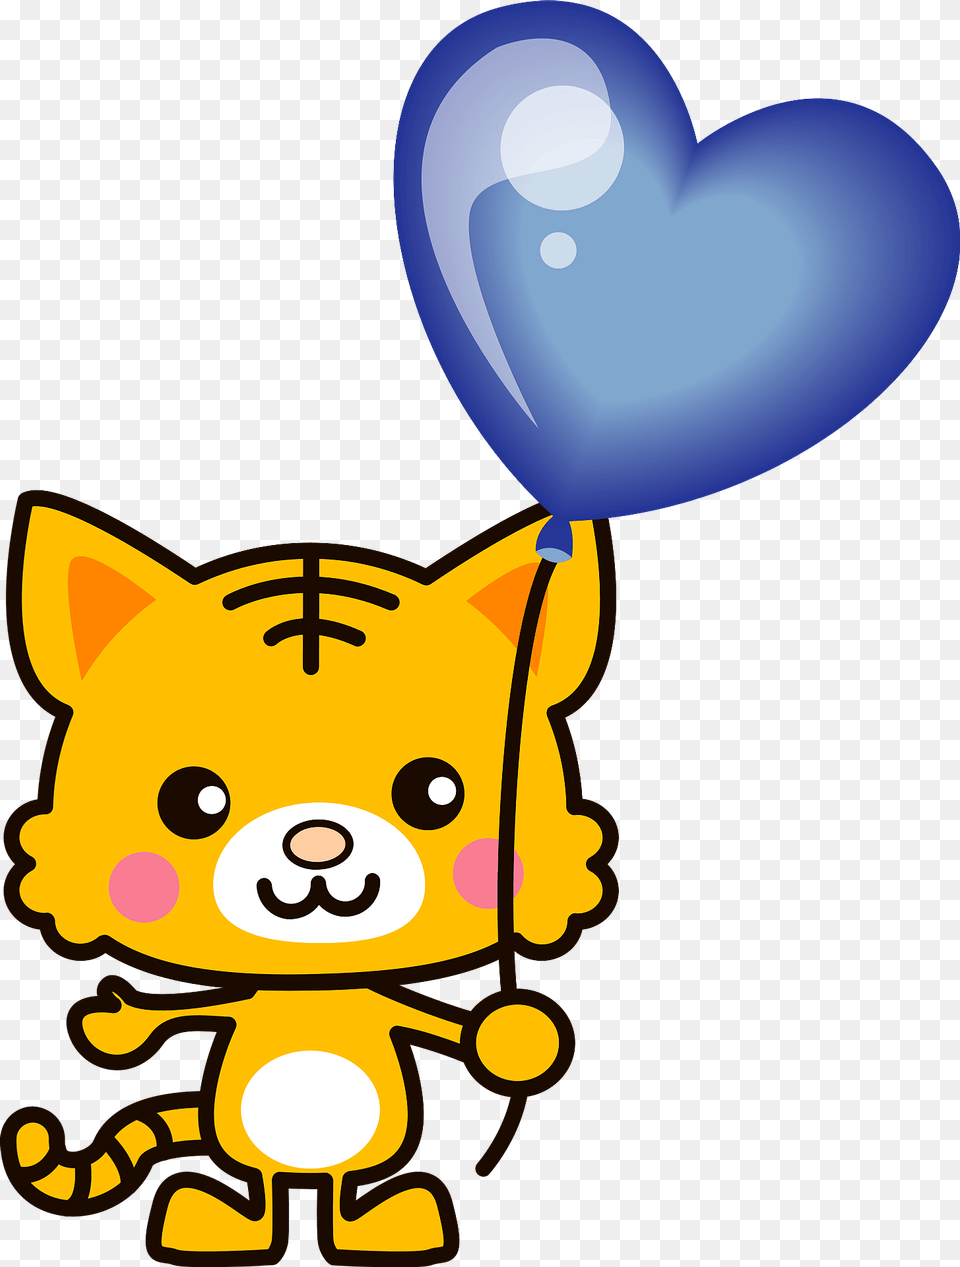 Tiger Is Holding A Blue Heart Balloon Clipart Free Transparent Png